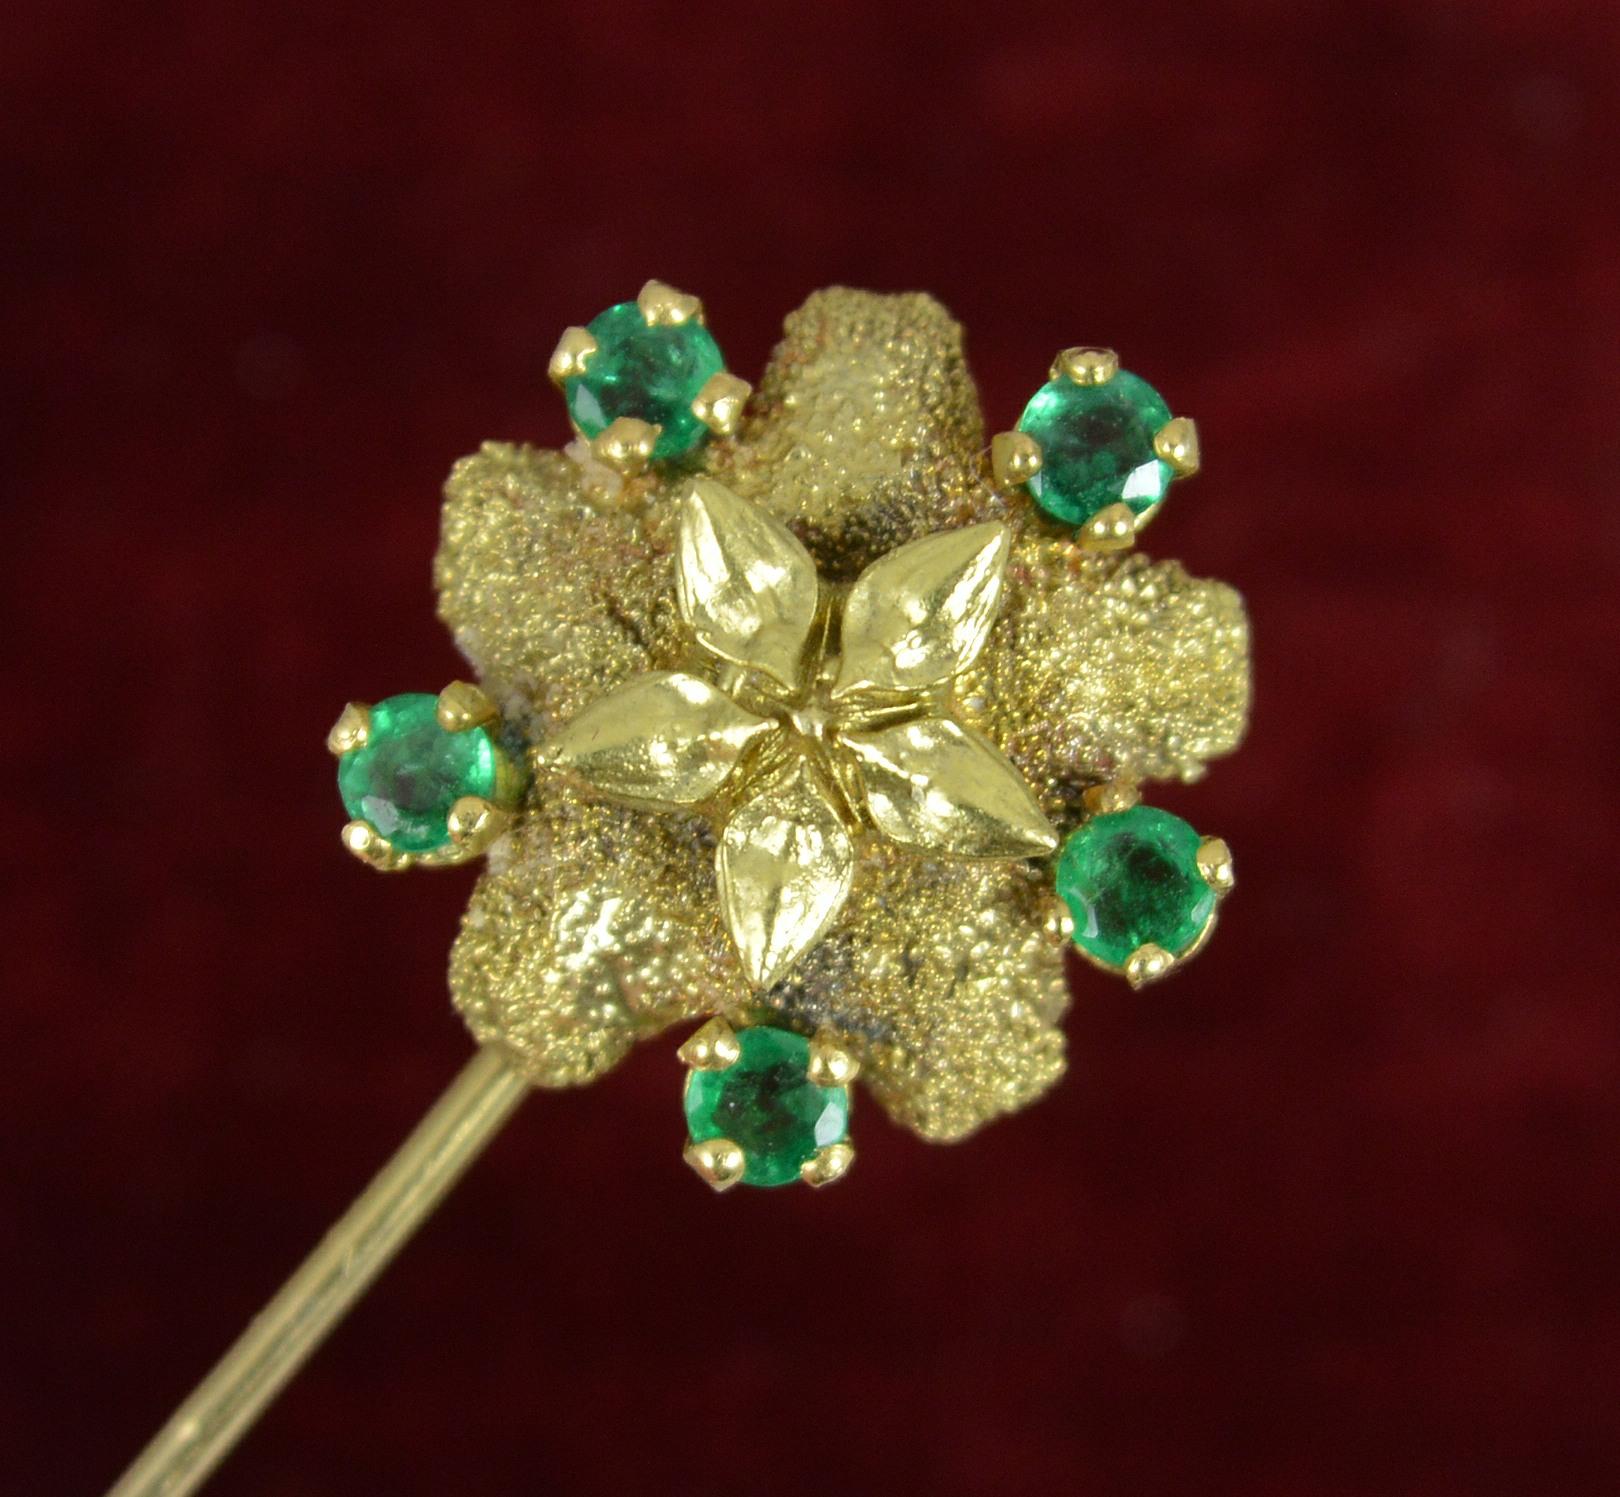 A fantastic 18 carat gold and emerald stick tie pin.
18 carat yellow gold example.
Flower or star head design with five natural round cut emeralds set to the edge.

Condition ; Very good. Well set emeralds. Straight pin.

Please view photographs